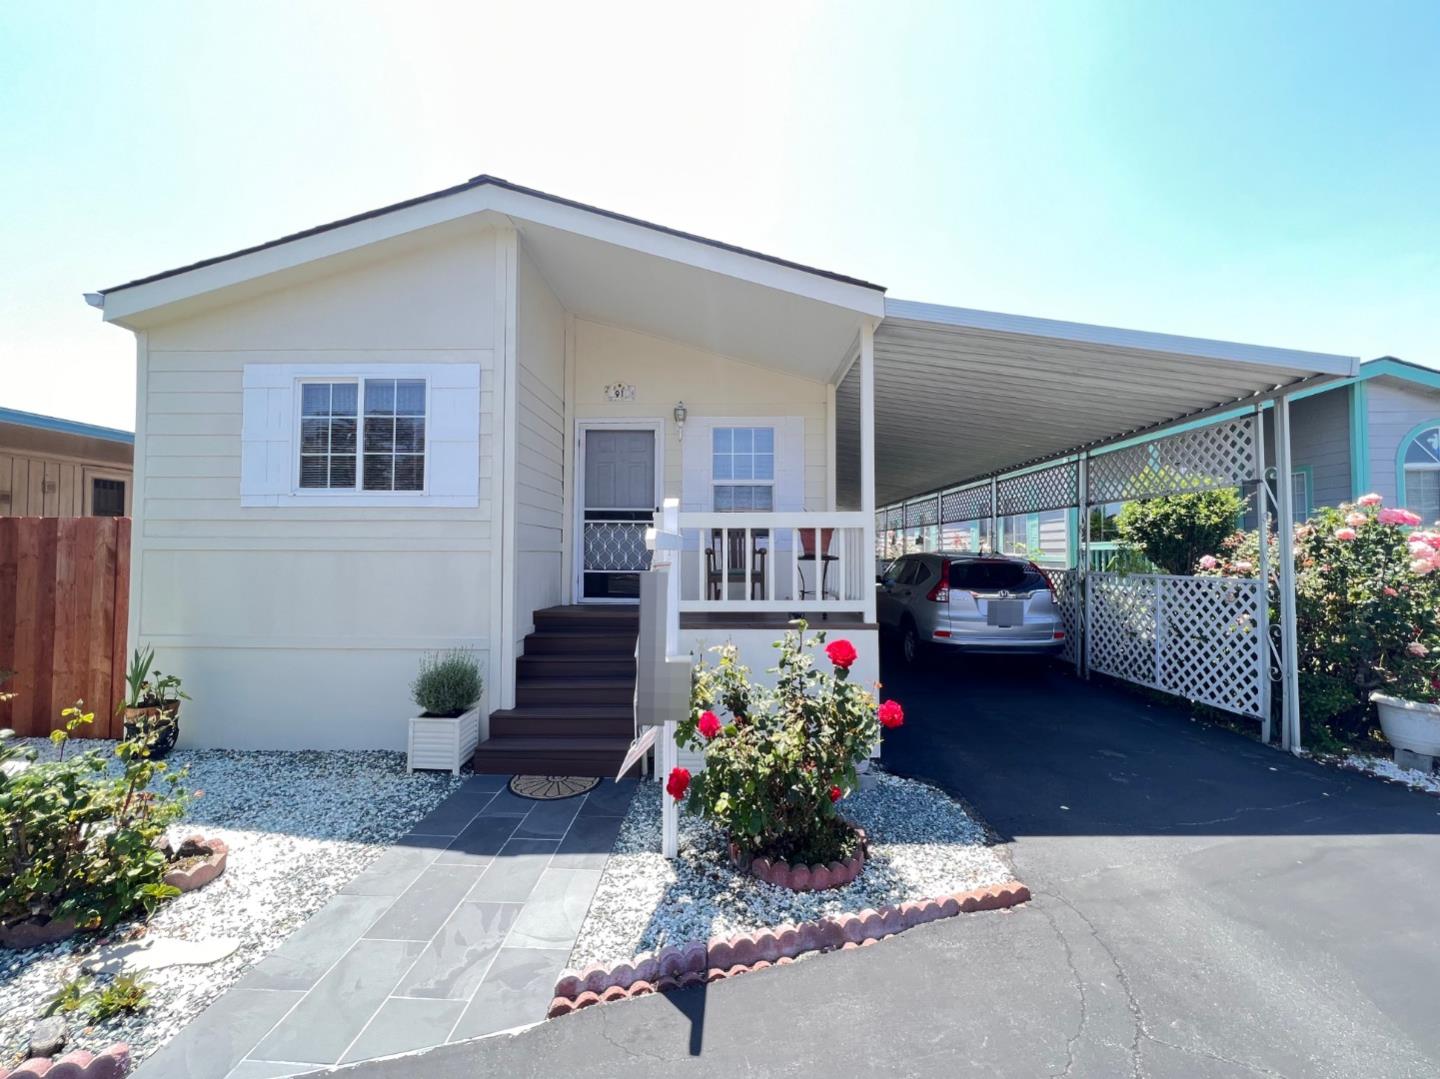 Photo of 60 Wilson Wy #91 in Milpitas, CA